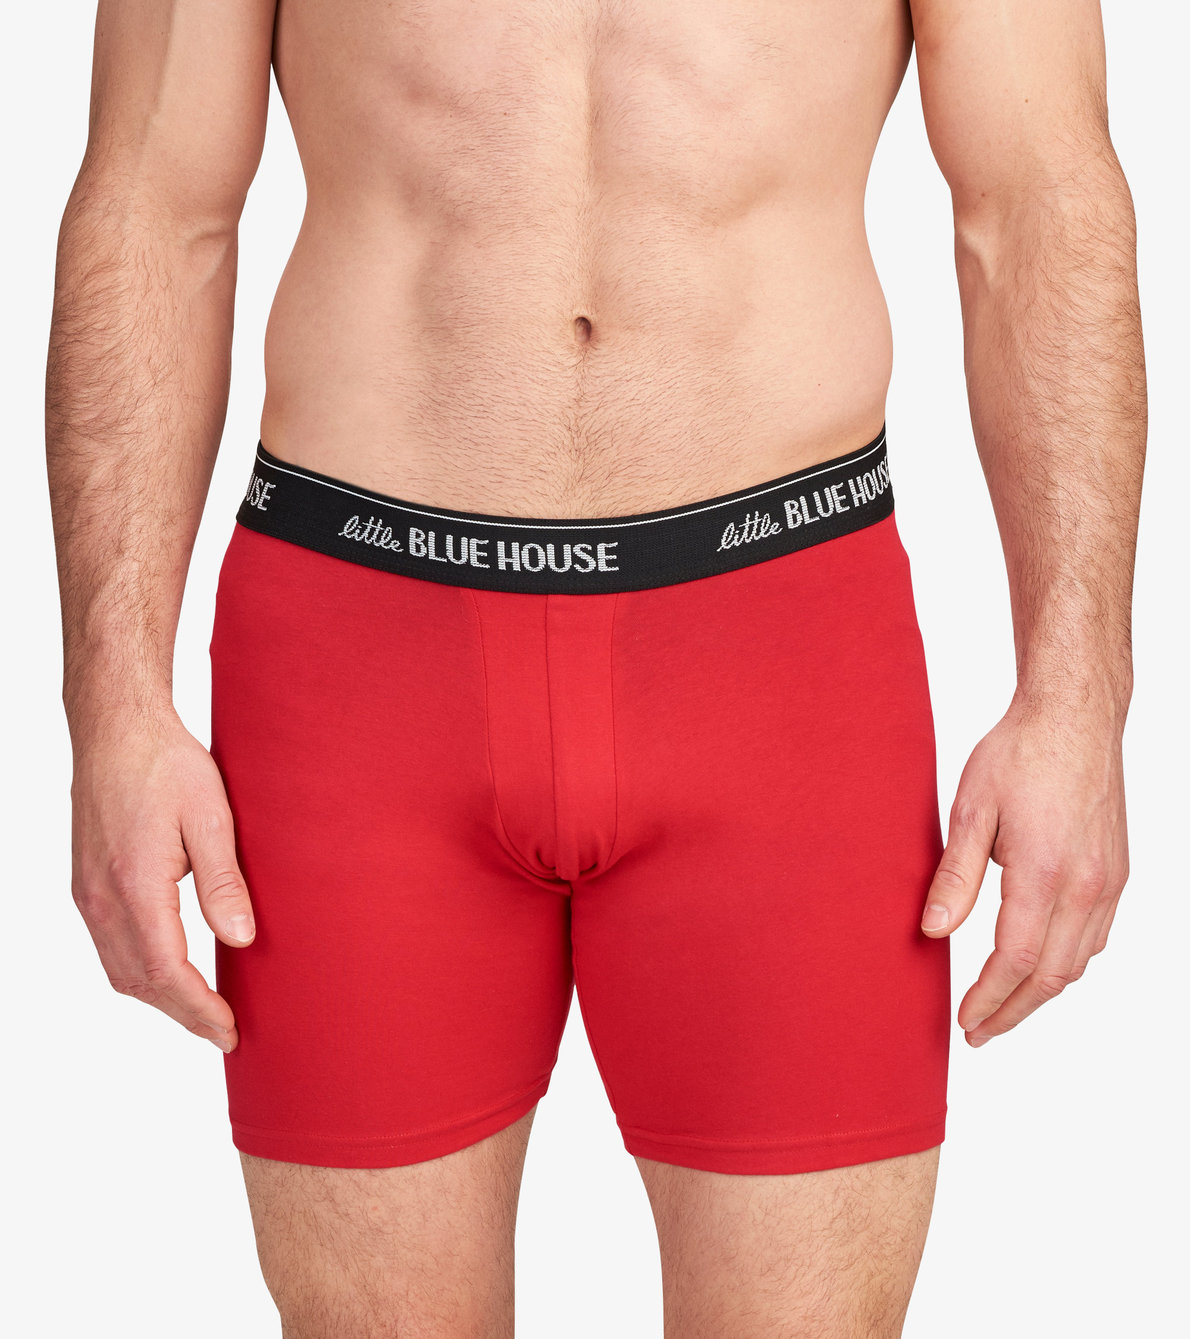 View larger image of Men's Nice Balls Holiday Ornament Boxers